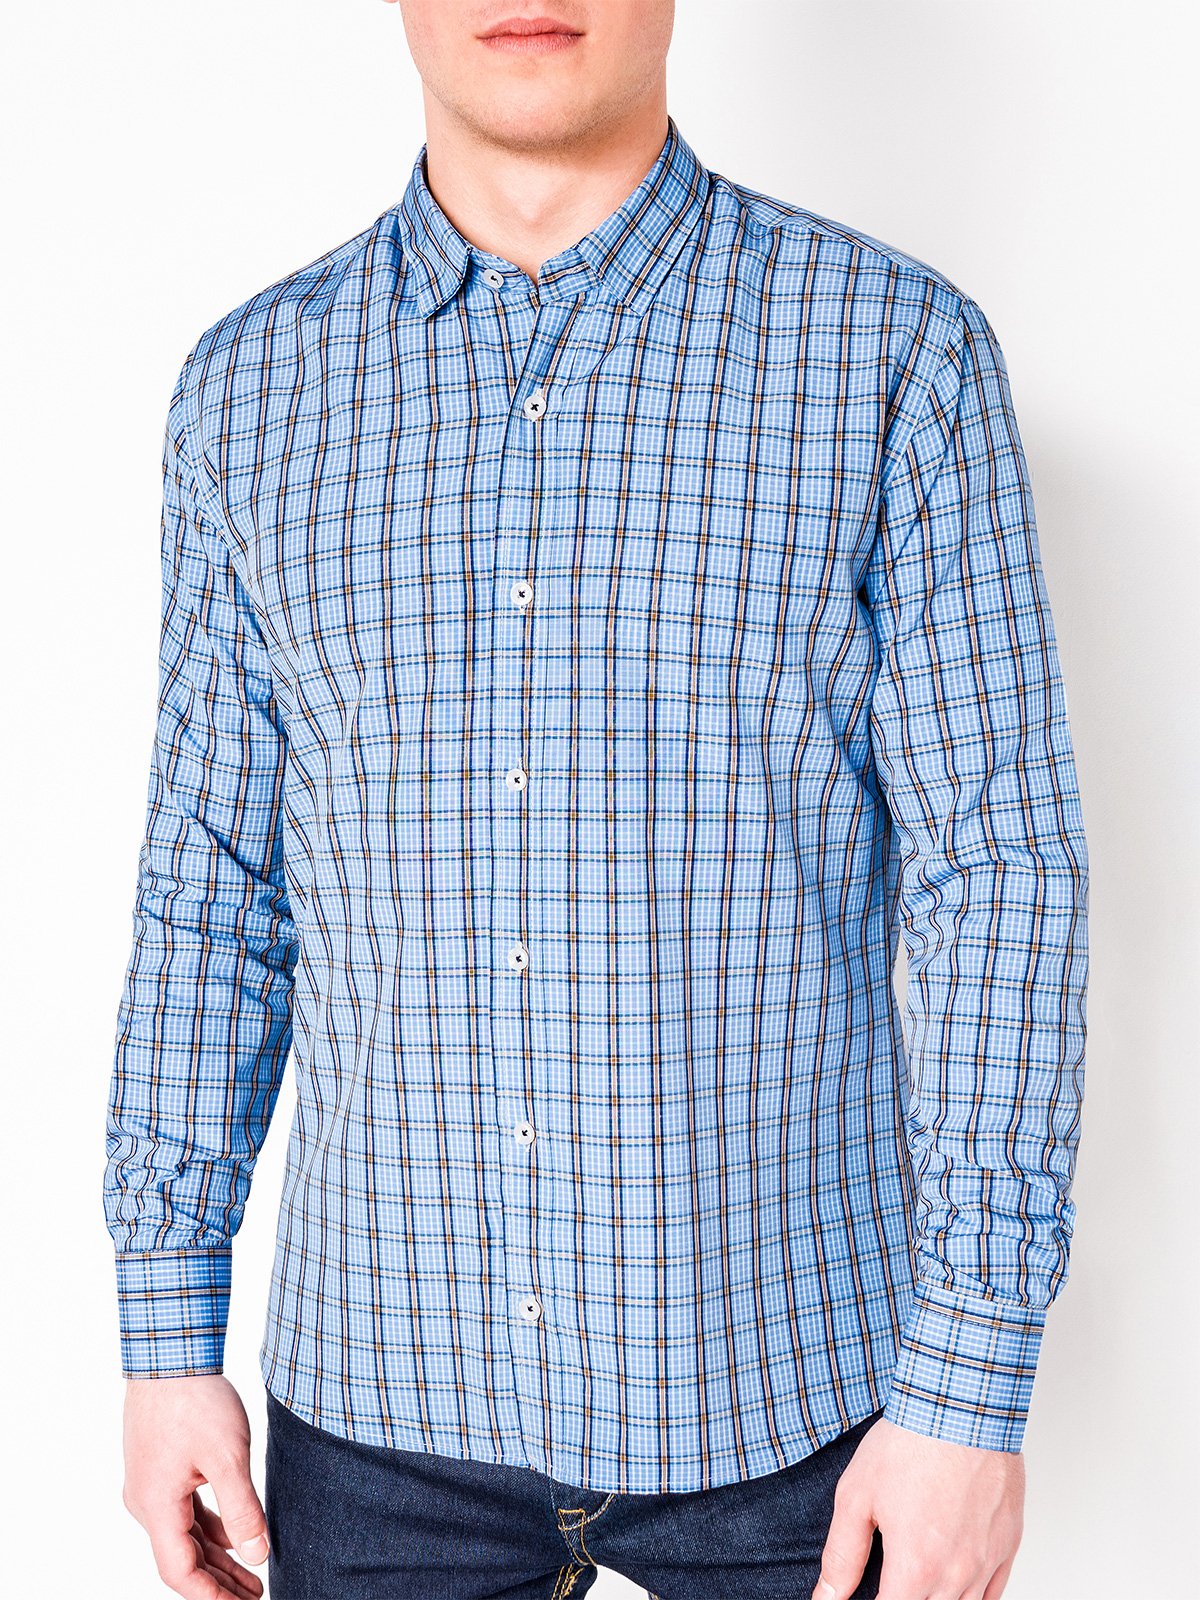 Men's check shirt with long sleeves K450 - light blue | MODONE